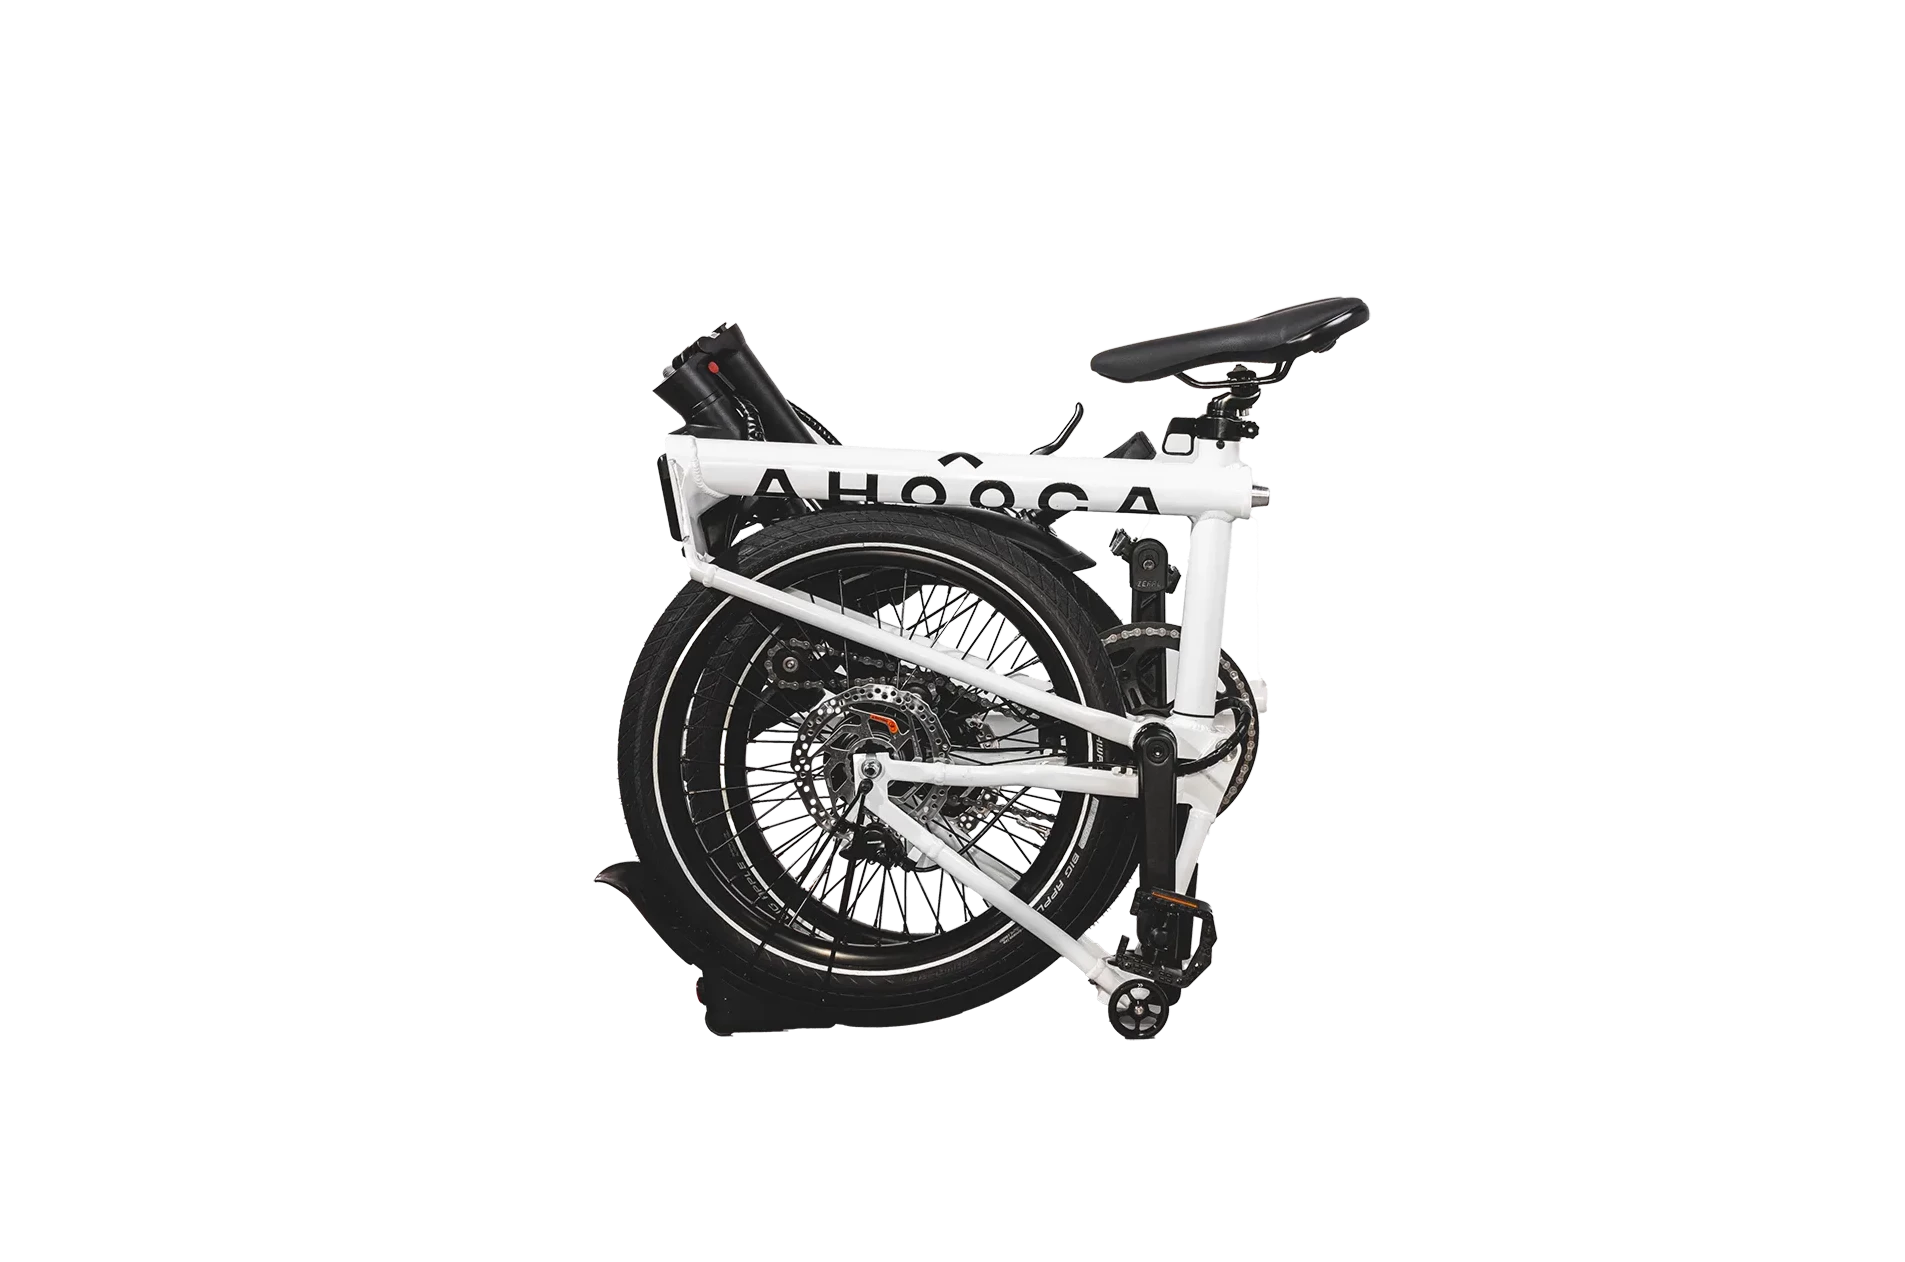 A product image of the Ahooga Max folding electric bike showing the bike in its fully folded configuration. The bike frame is white with black accents. The Ahooga Max folding electric bike is available to buy from Bleeper.